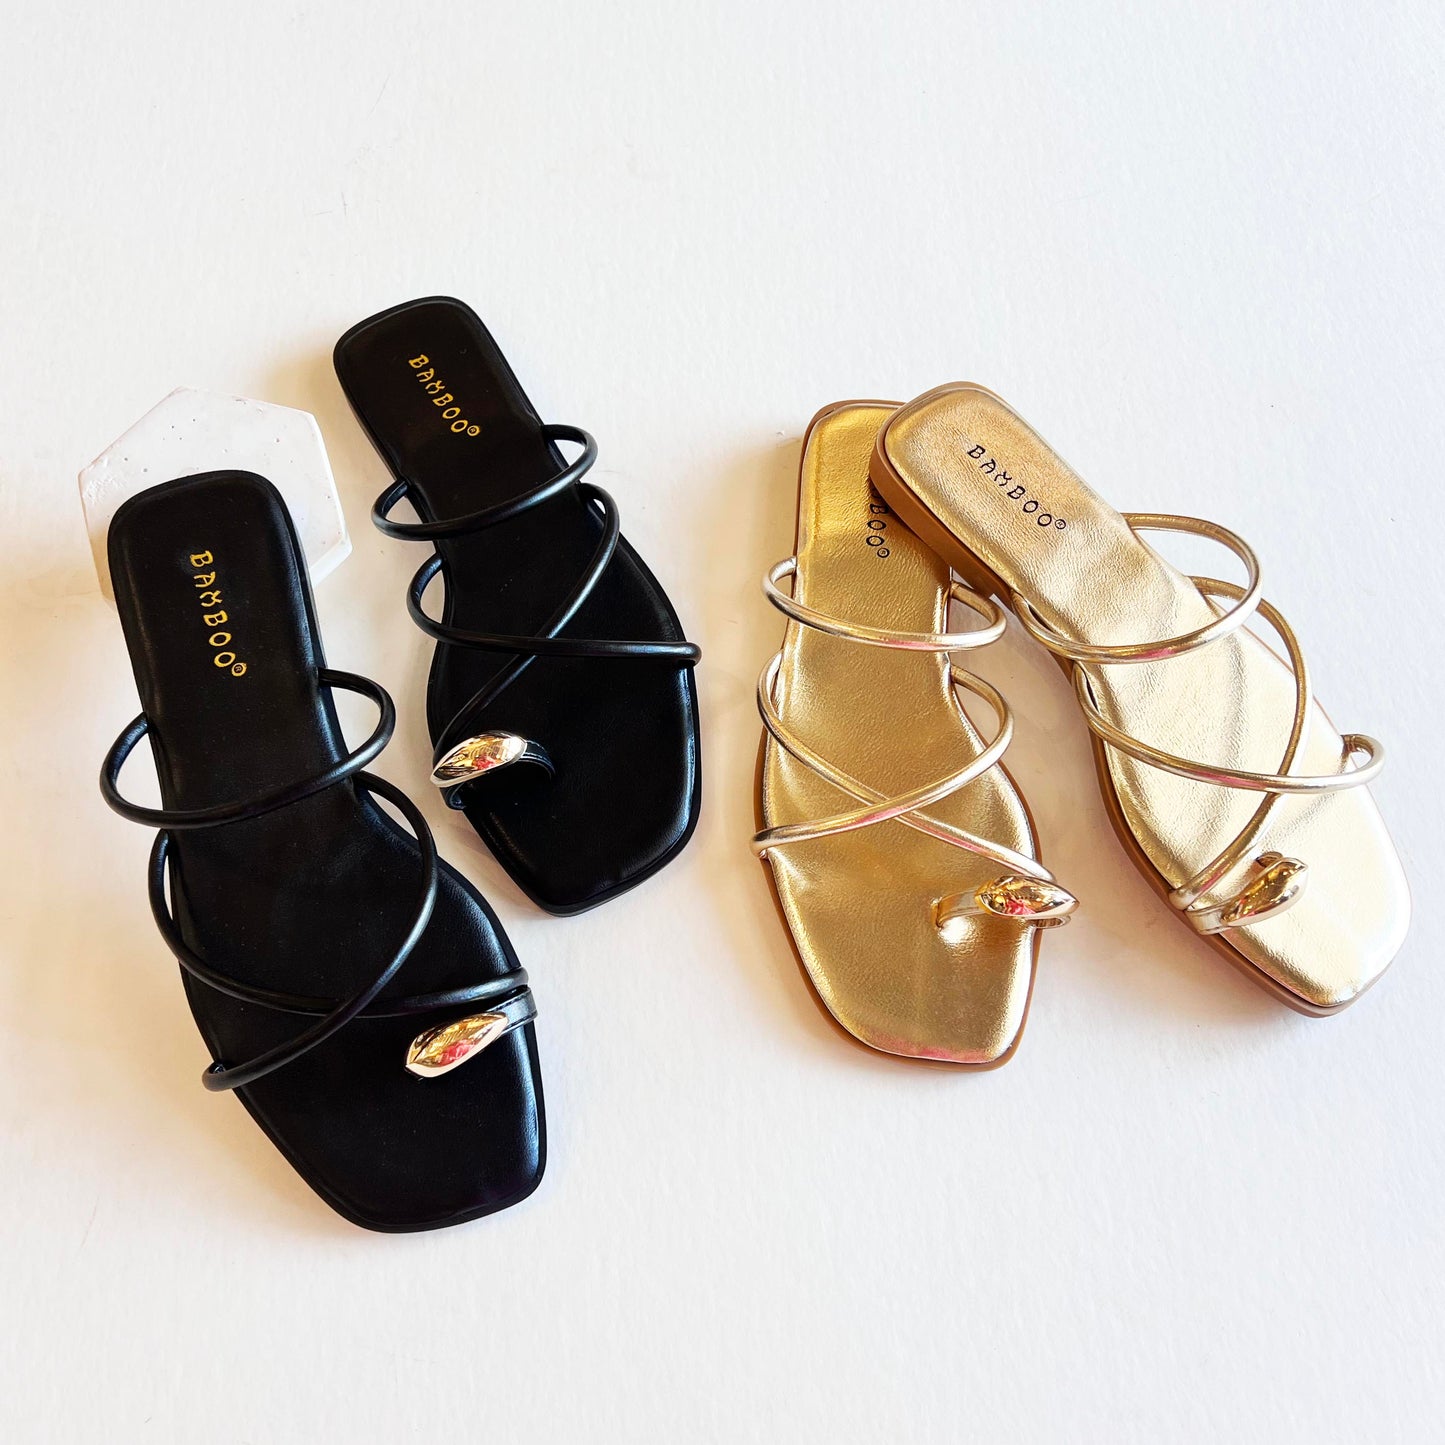 Pair of black strappy toe ring sandals for women, featuring sleek straps and a stylish toe ring."